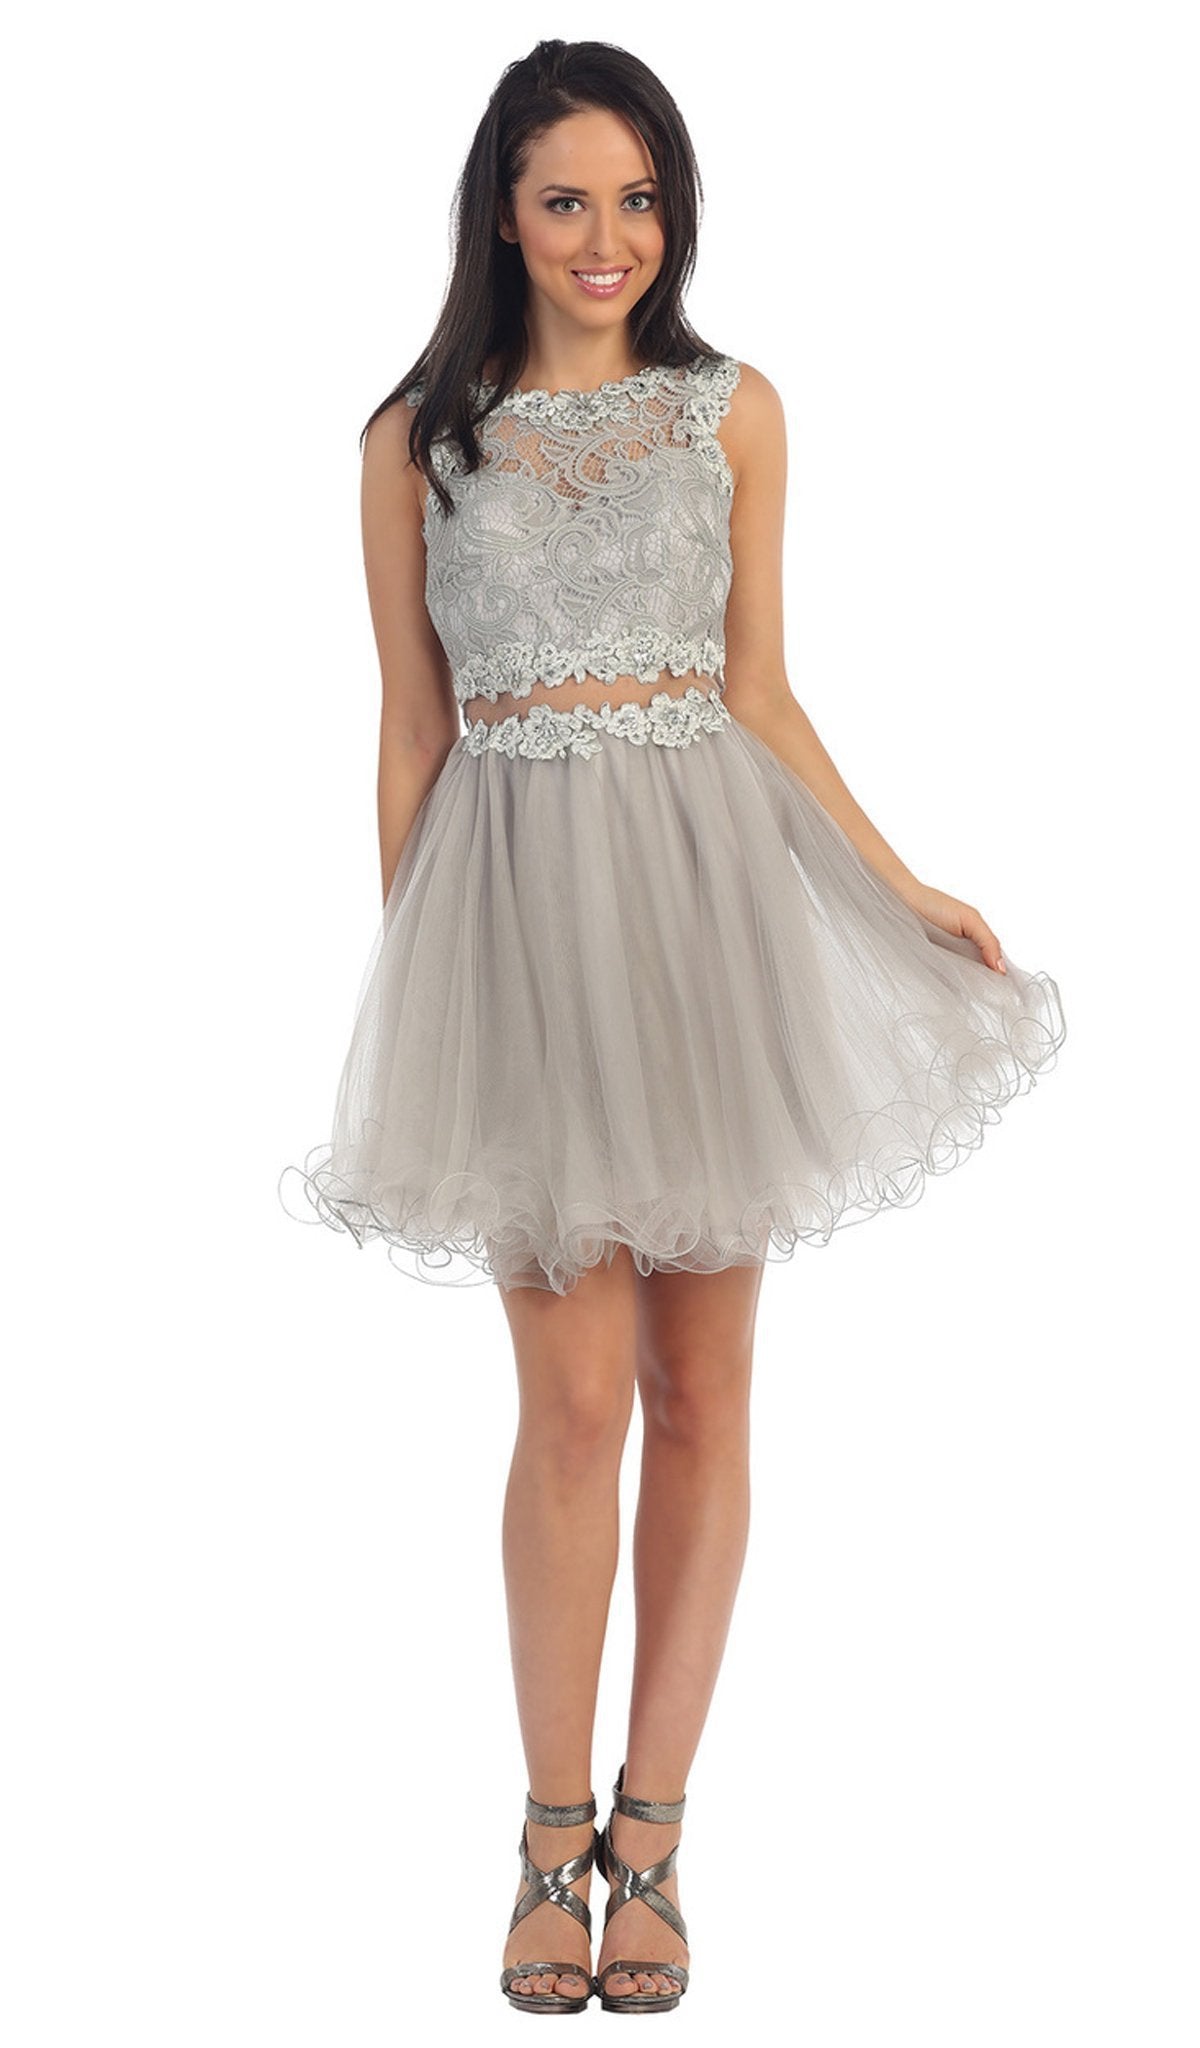 Dancing Queen - 9080 Bejeweled Lace Illusion Short Prom Dress Prom Dresses XS / Silver